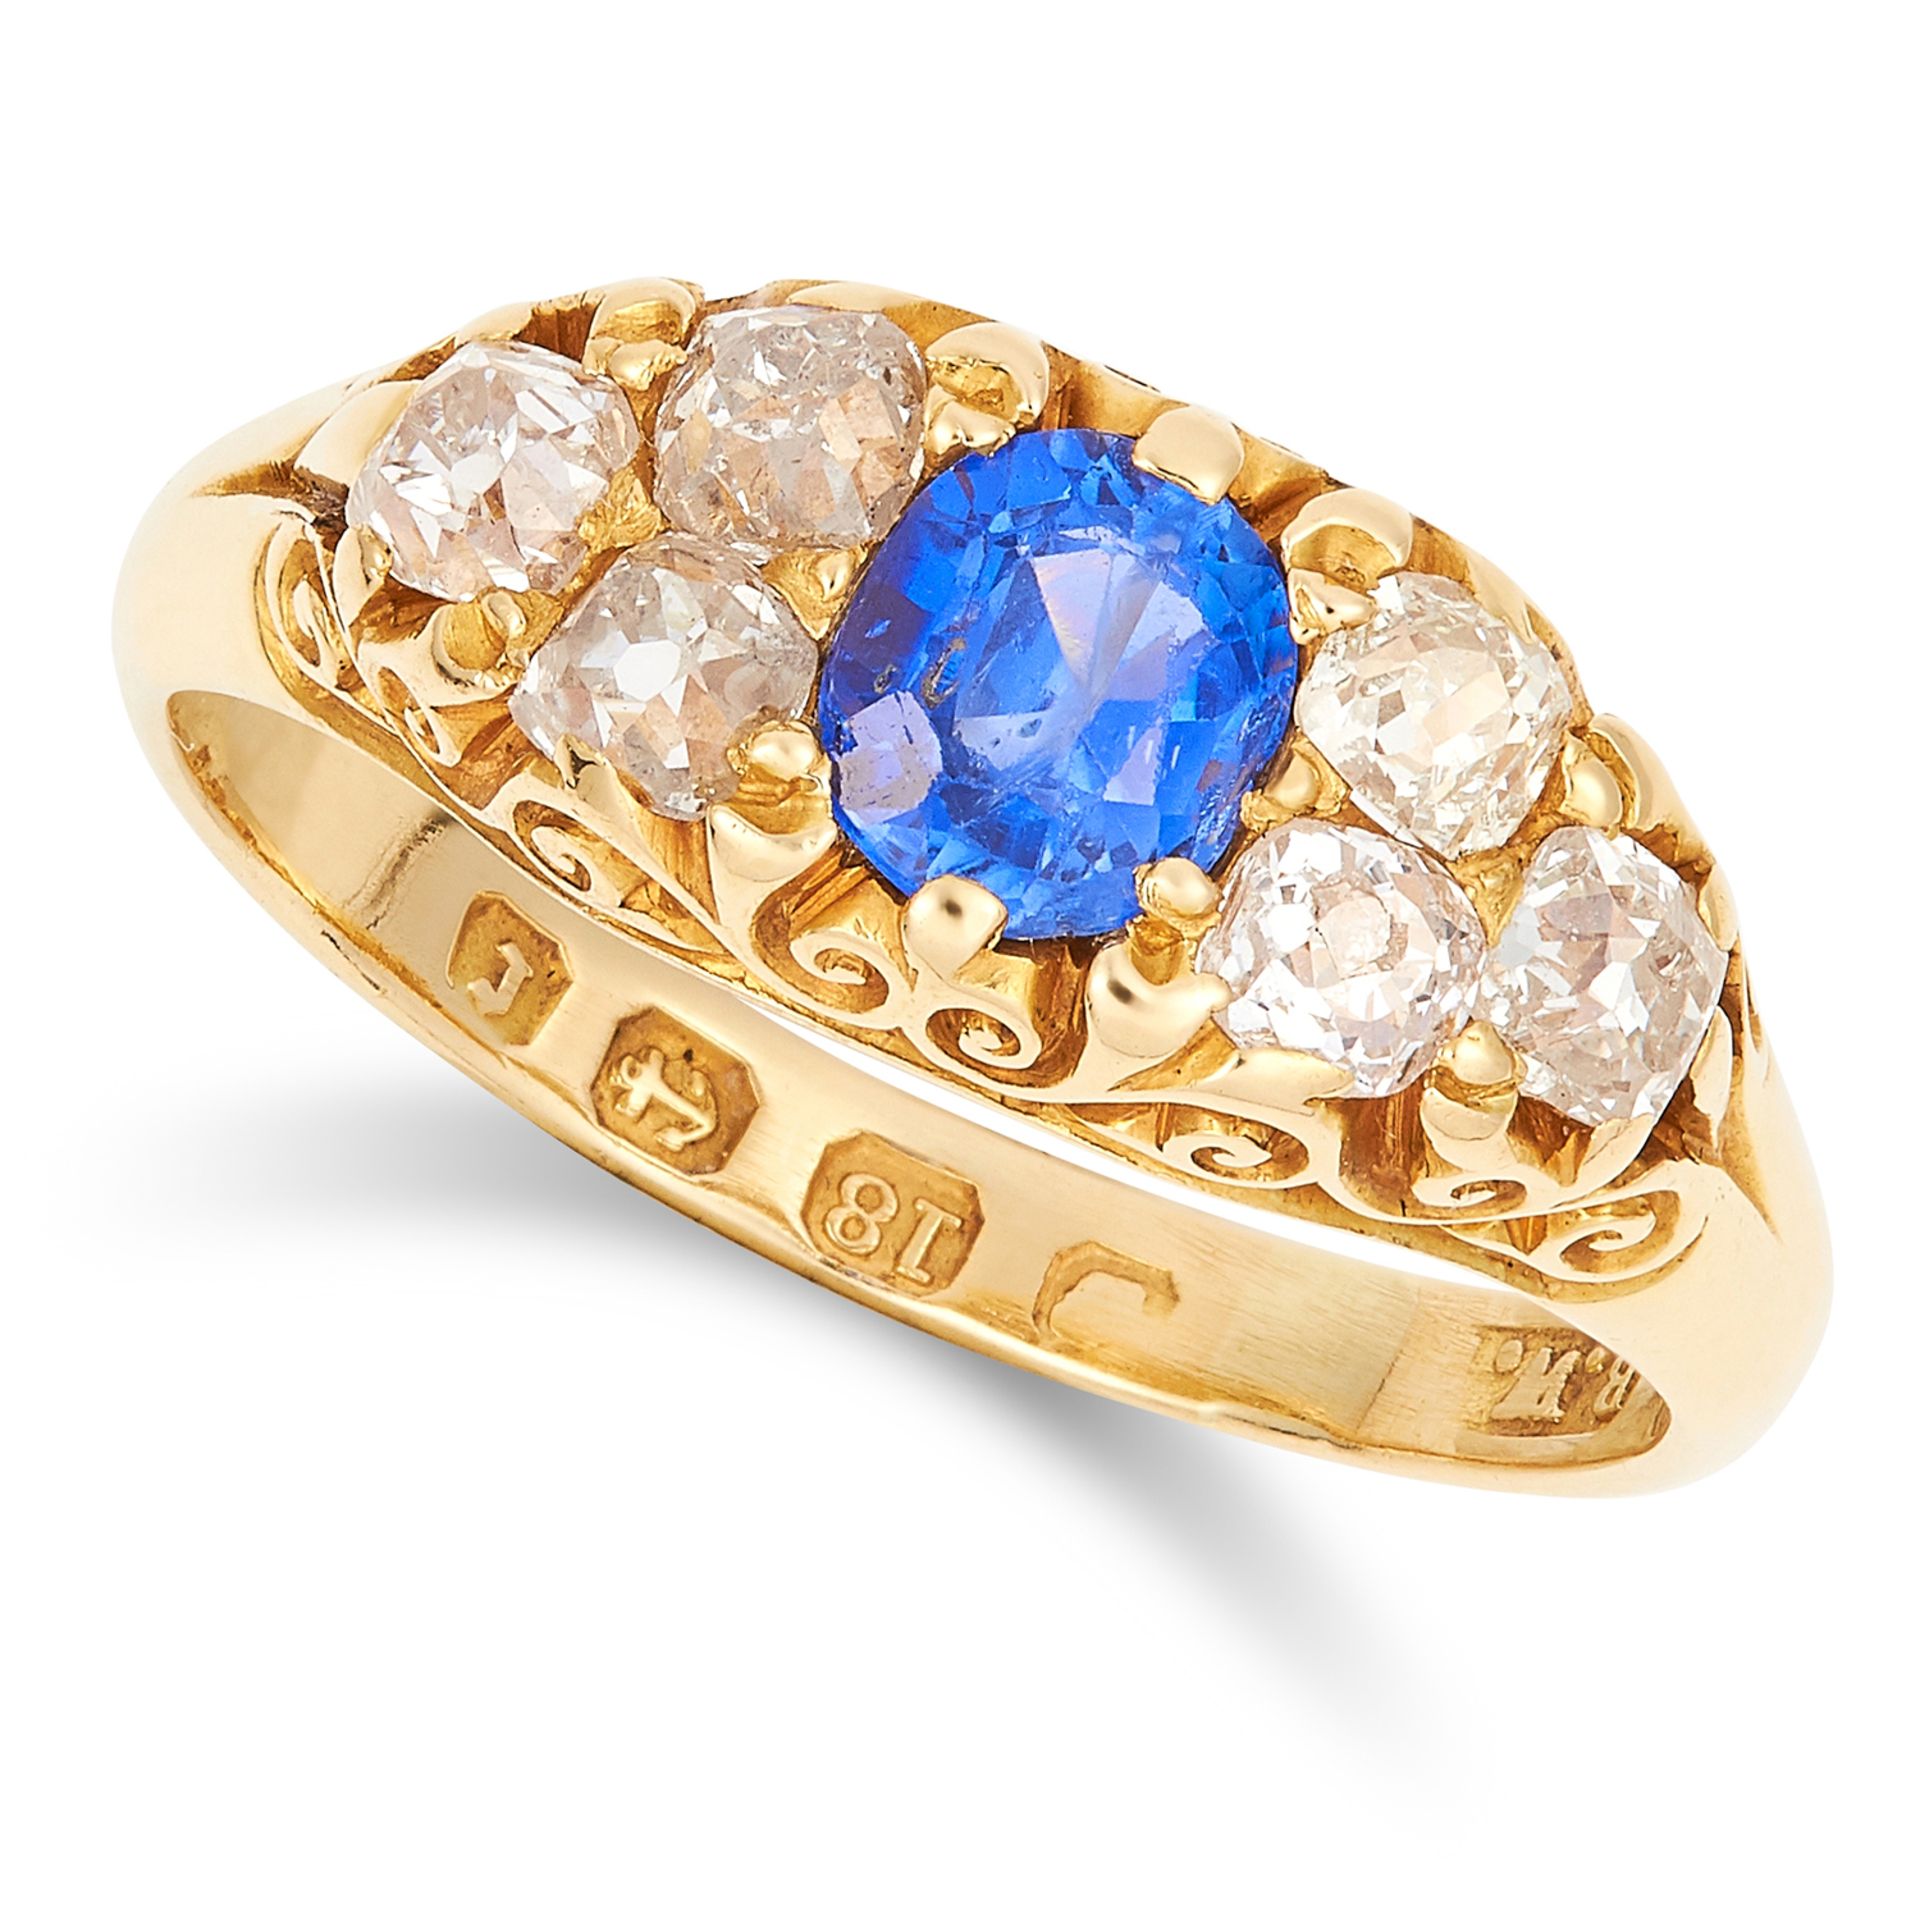 ANTIQUE VICTORIAN SAPPHIRE AND DIAMOND RING, 1891 set with an oval cut sapphire of 0.80 carats and